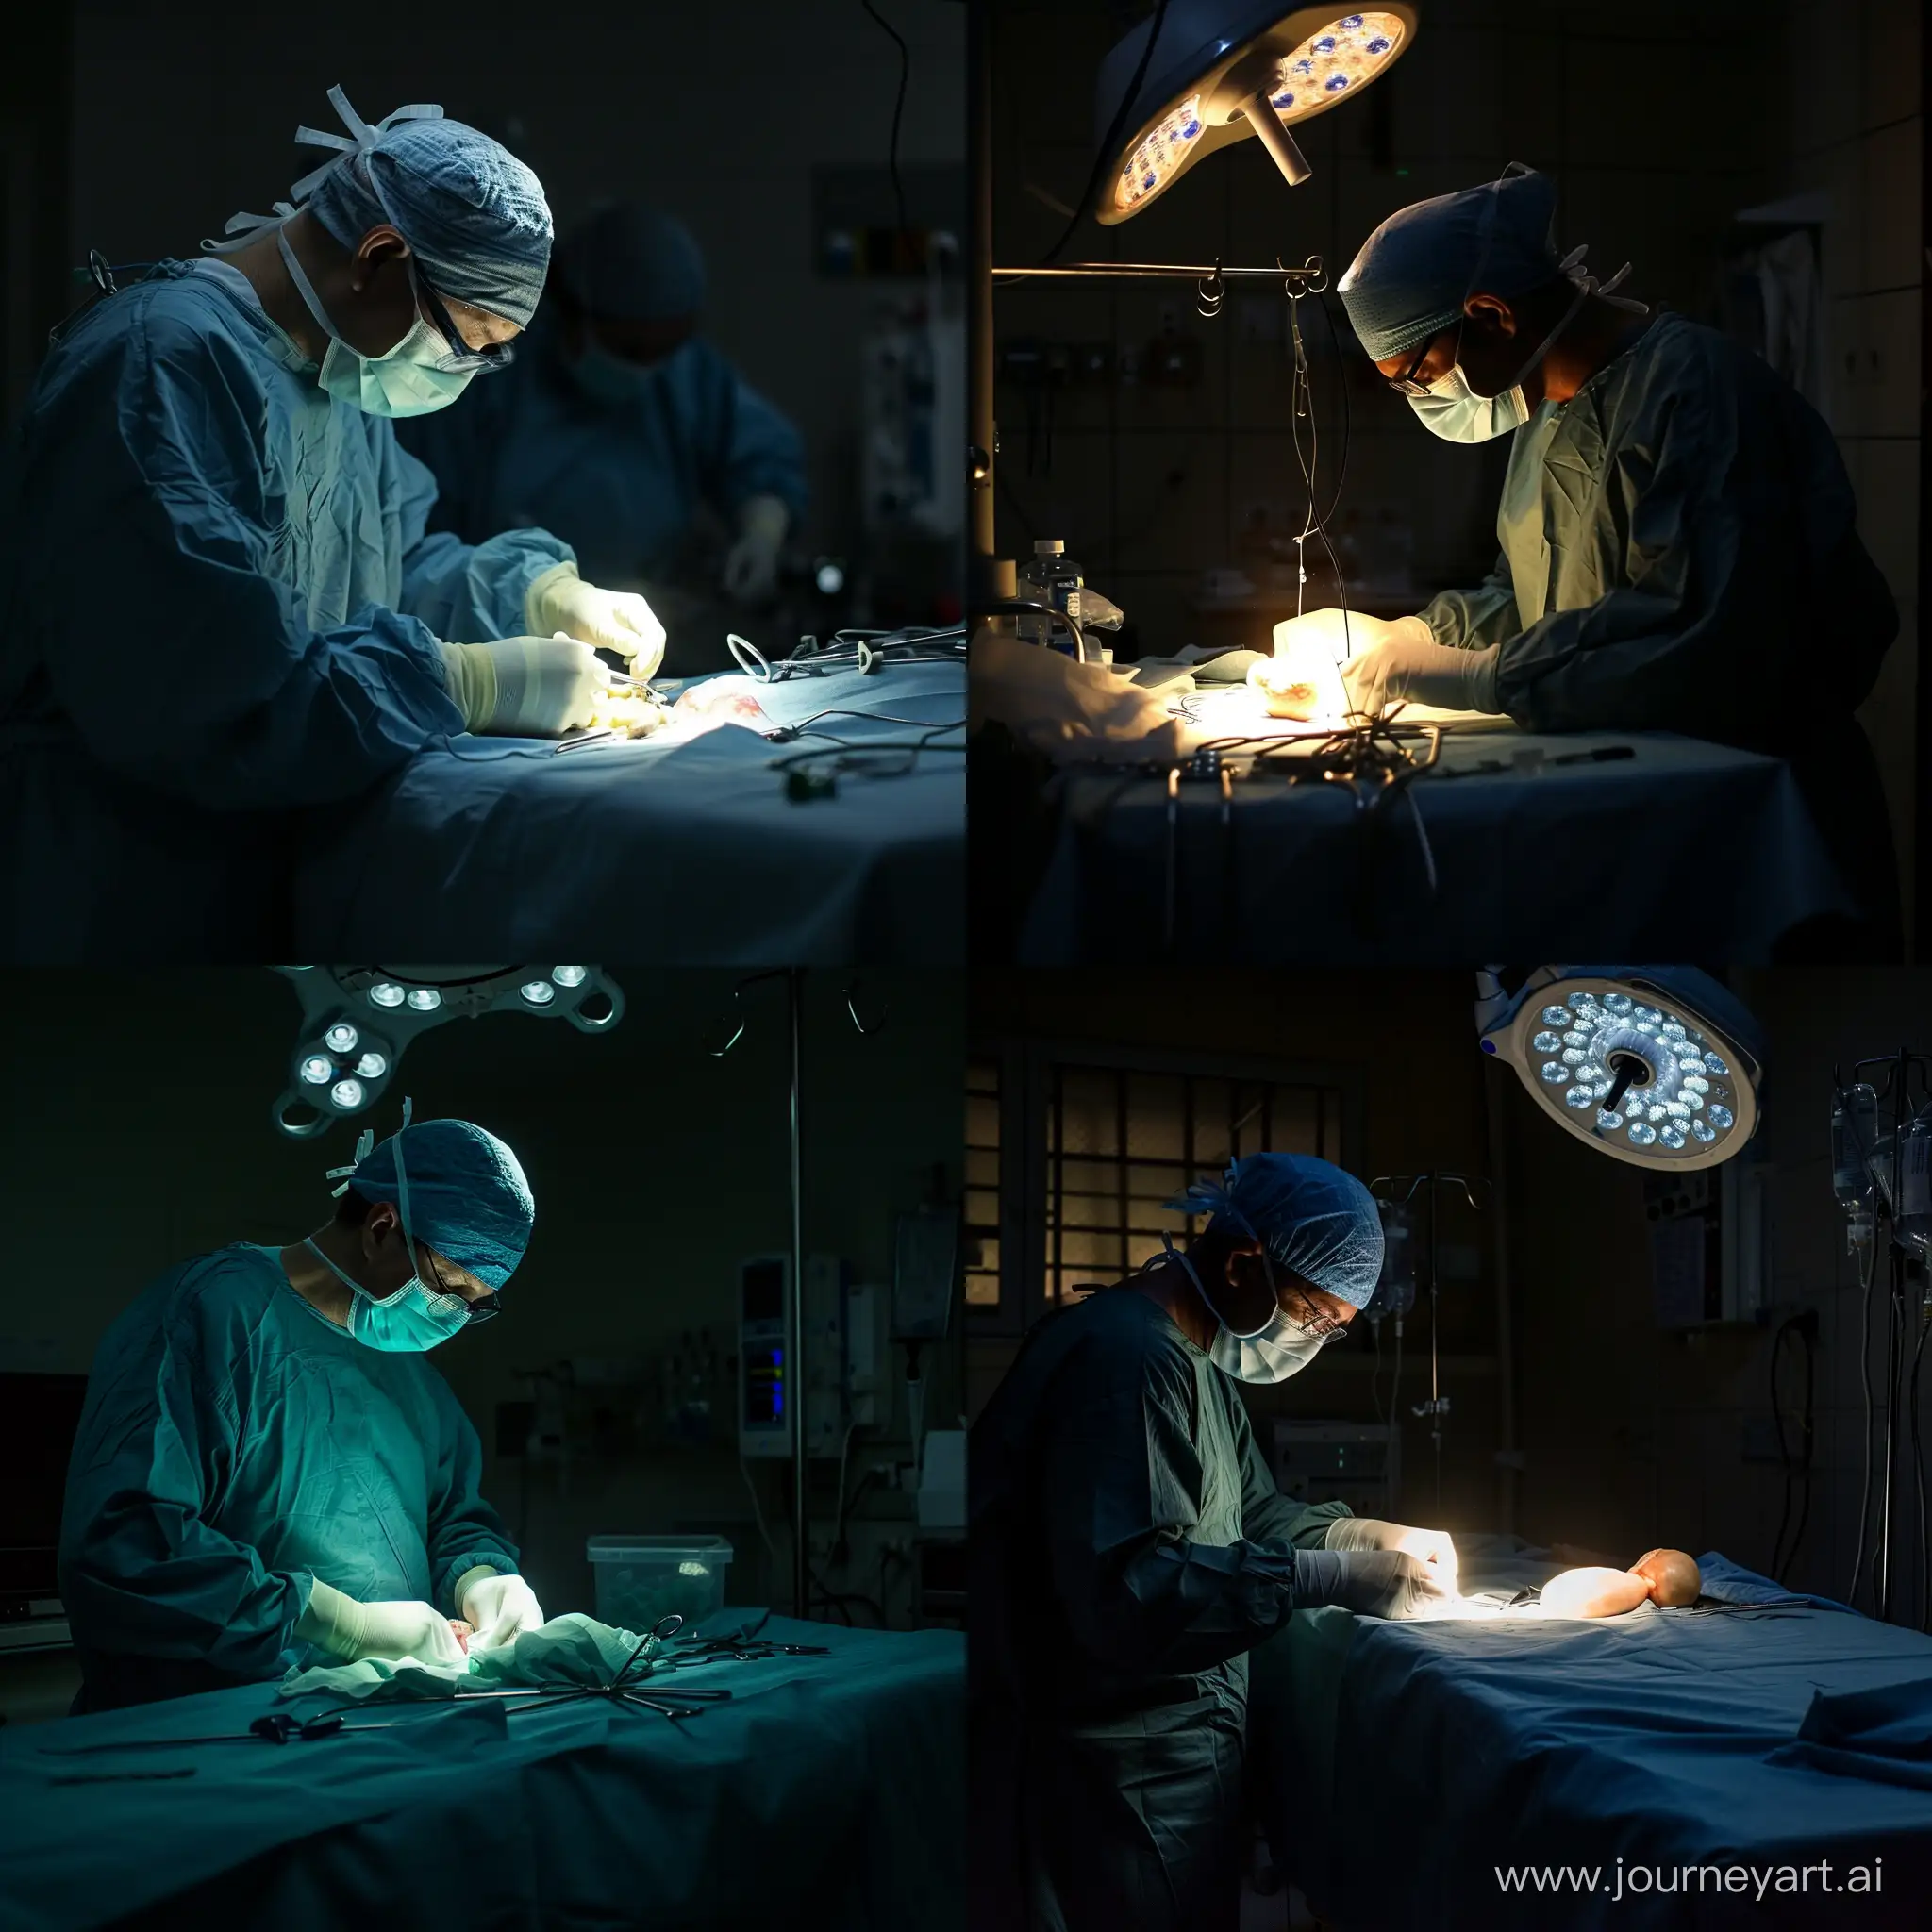 Appendix-Removal-Surgery-in-Dimly-Lit-Operating-Room